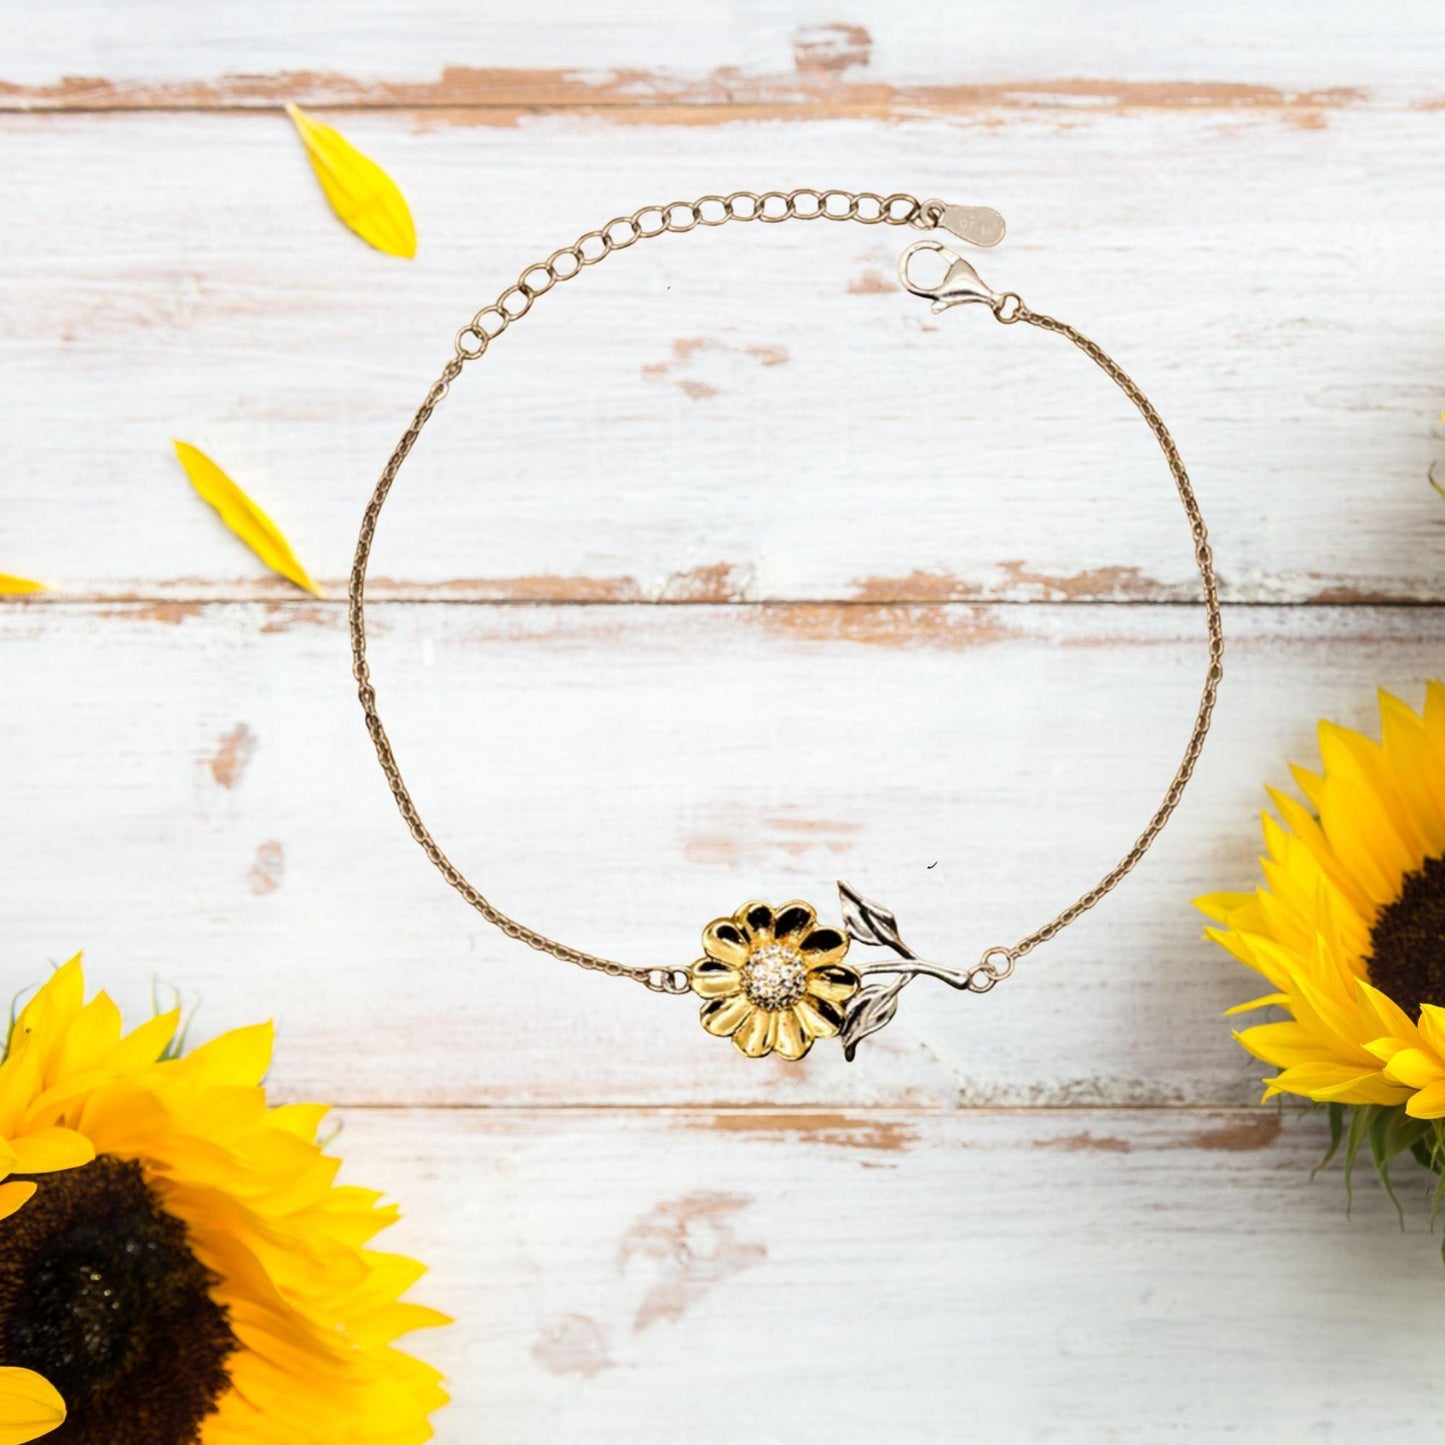 Dental Hygienist Sunflower Bracelet - Thanks for being who you are - Birthday Christmas Jewelry Gifts Coworkers Colleague Boss - Mallard Moon Gift Shop